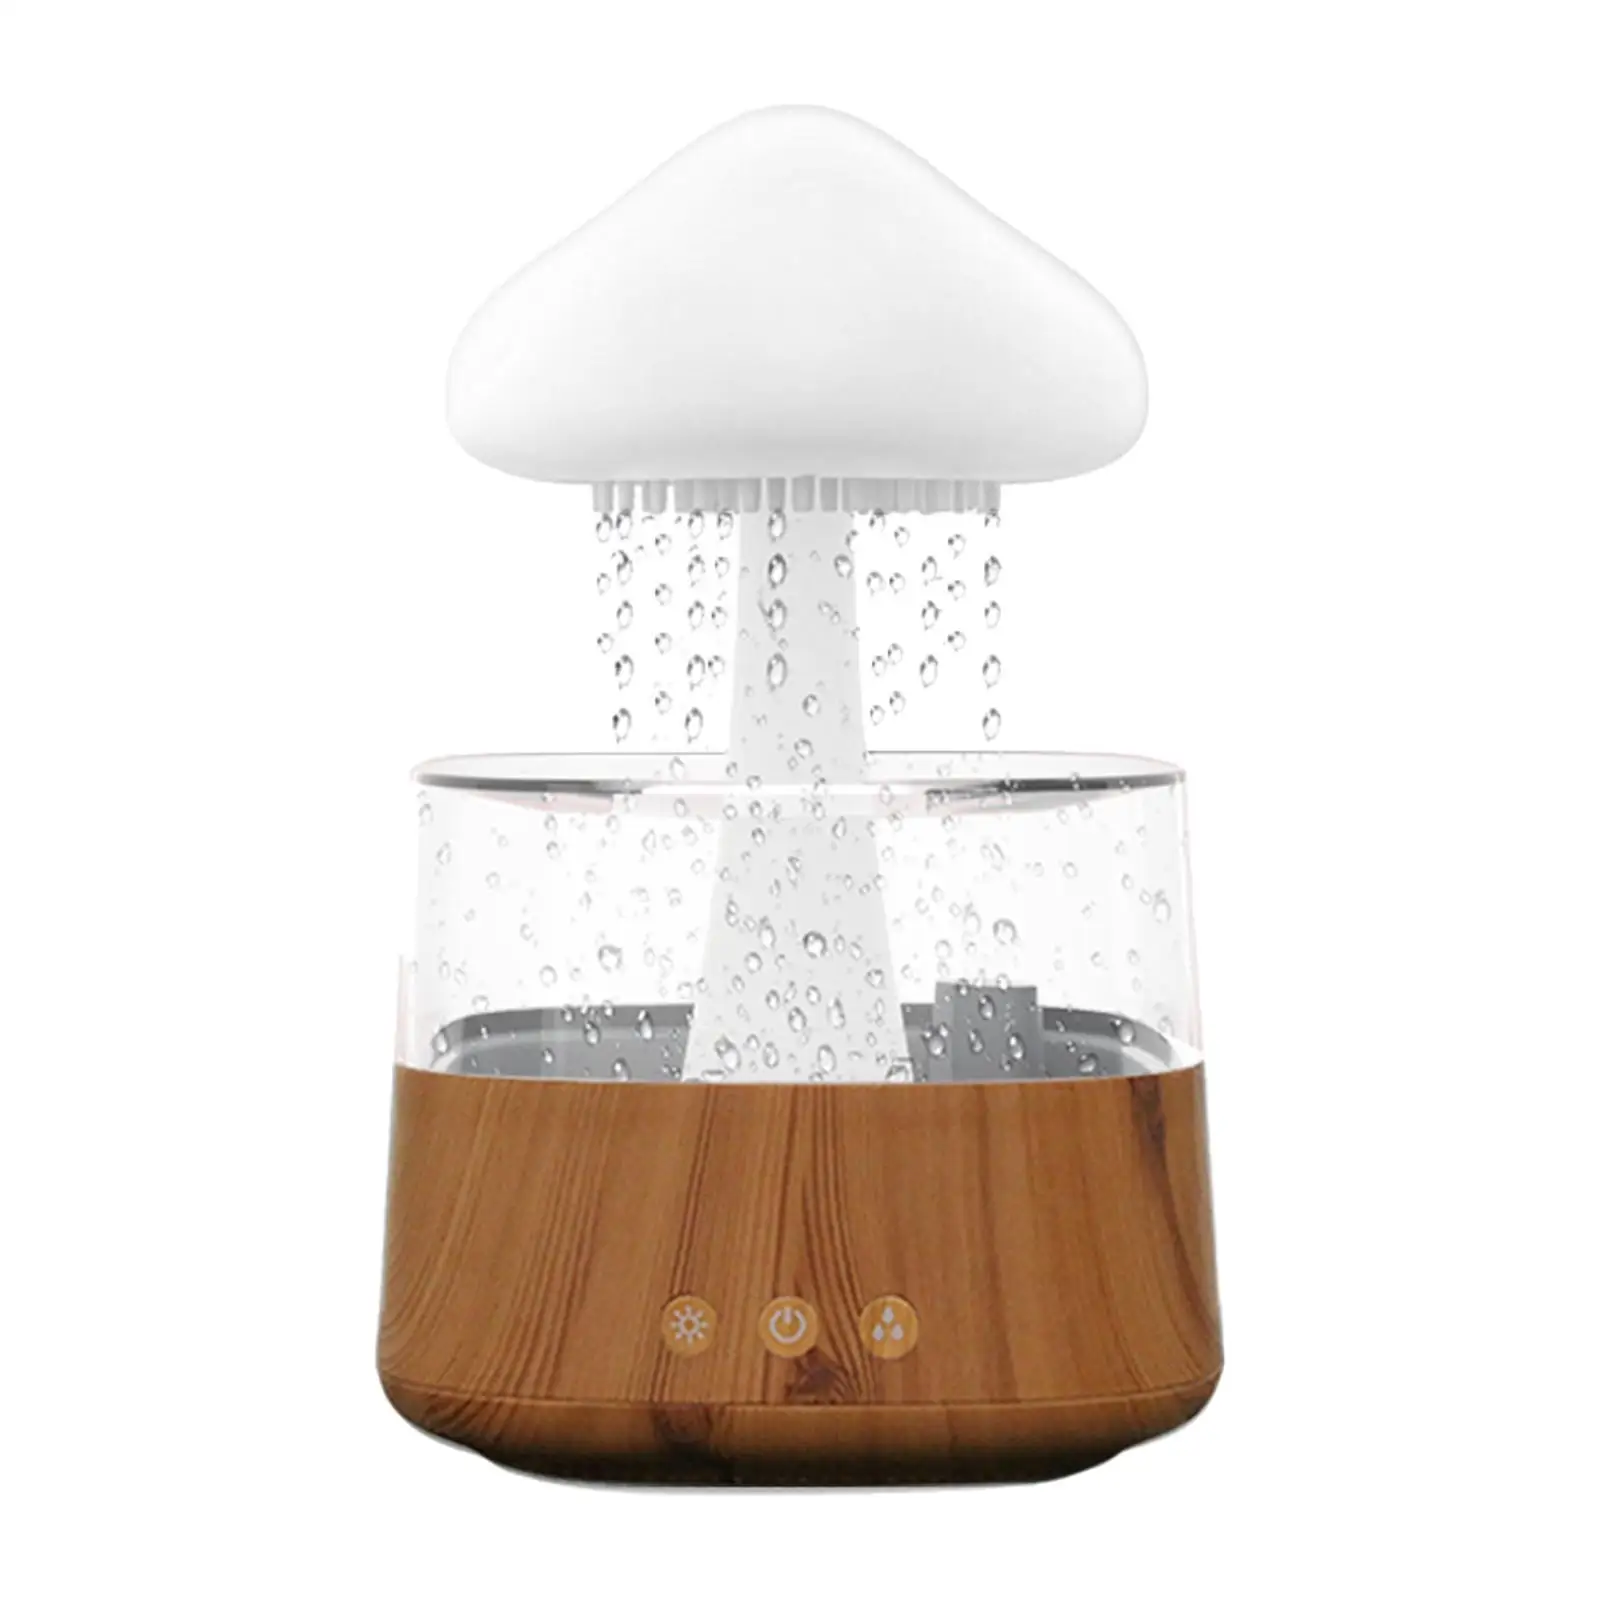 Cloud Raindrop Humidifier Essential Oil Diffuser for Living Room Study Room